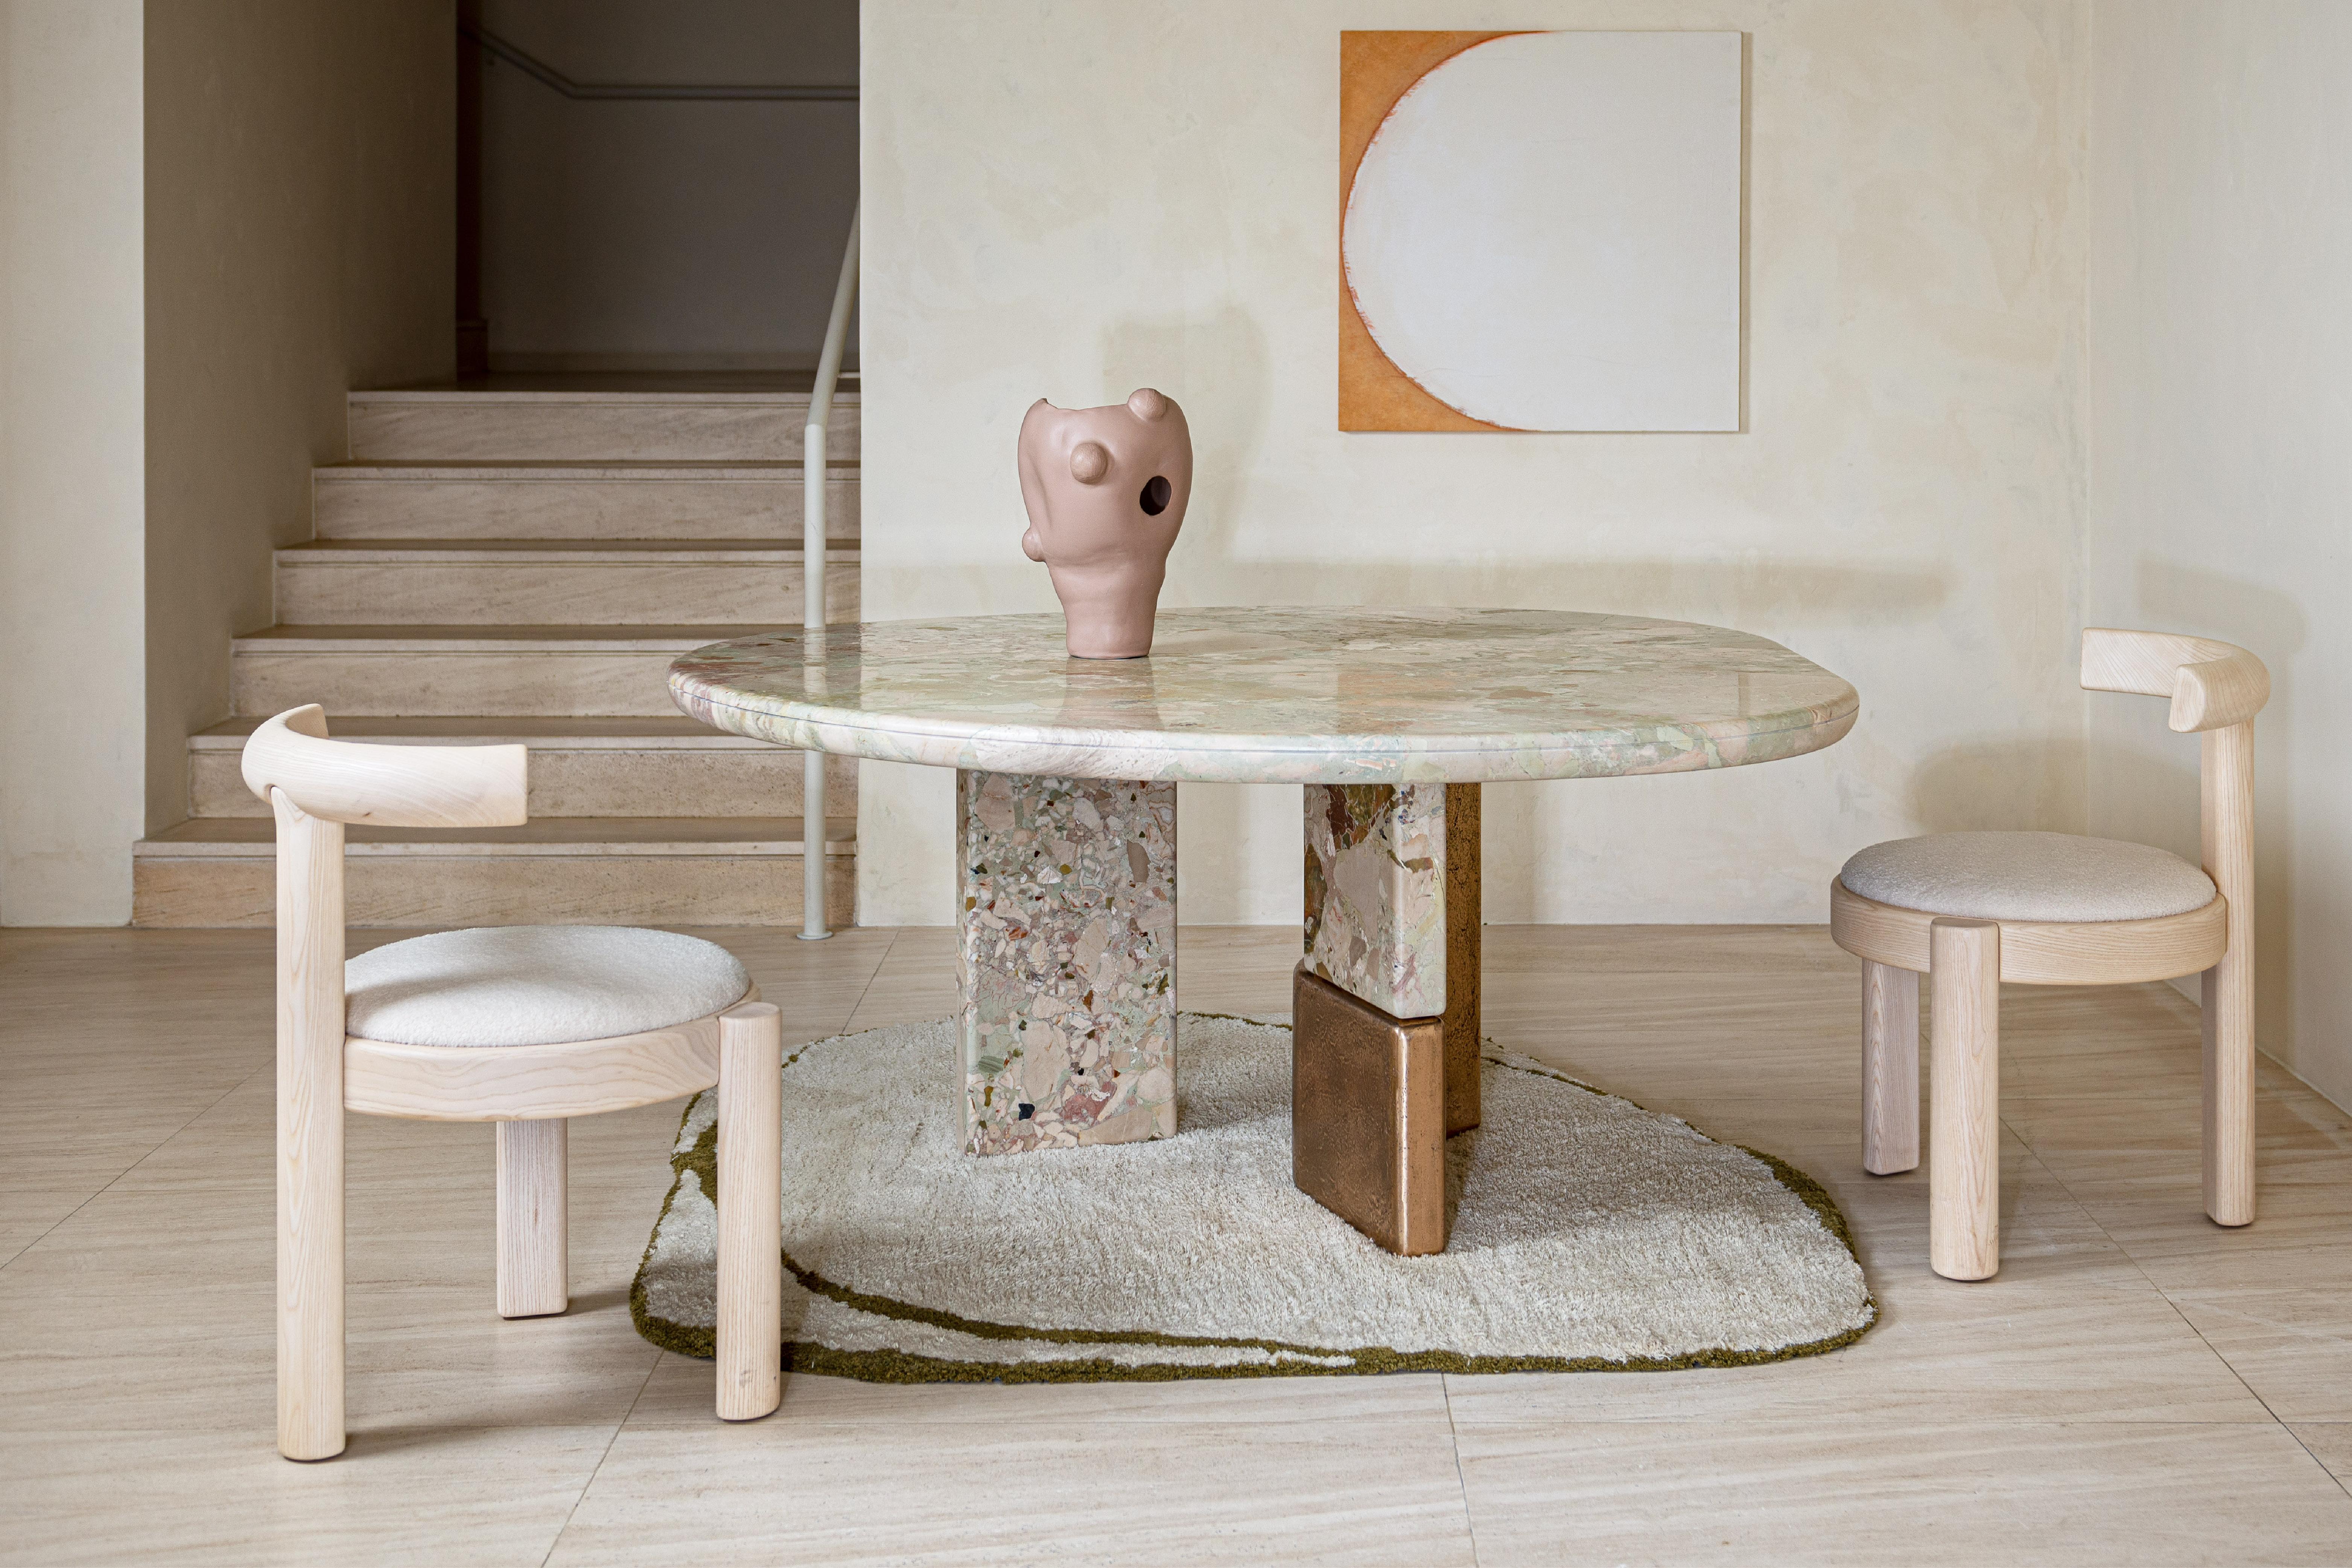 Ovoo table tells stories of faraway lands, belonging to the shamanic cult typical of Mongolia. The inspiration of this collection is the concept of “ovoo”: the piles of stones used as reference points at the top of the mountains, were in fact the